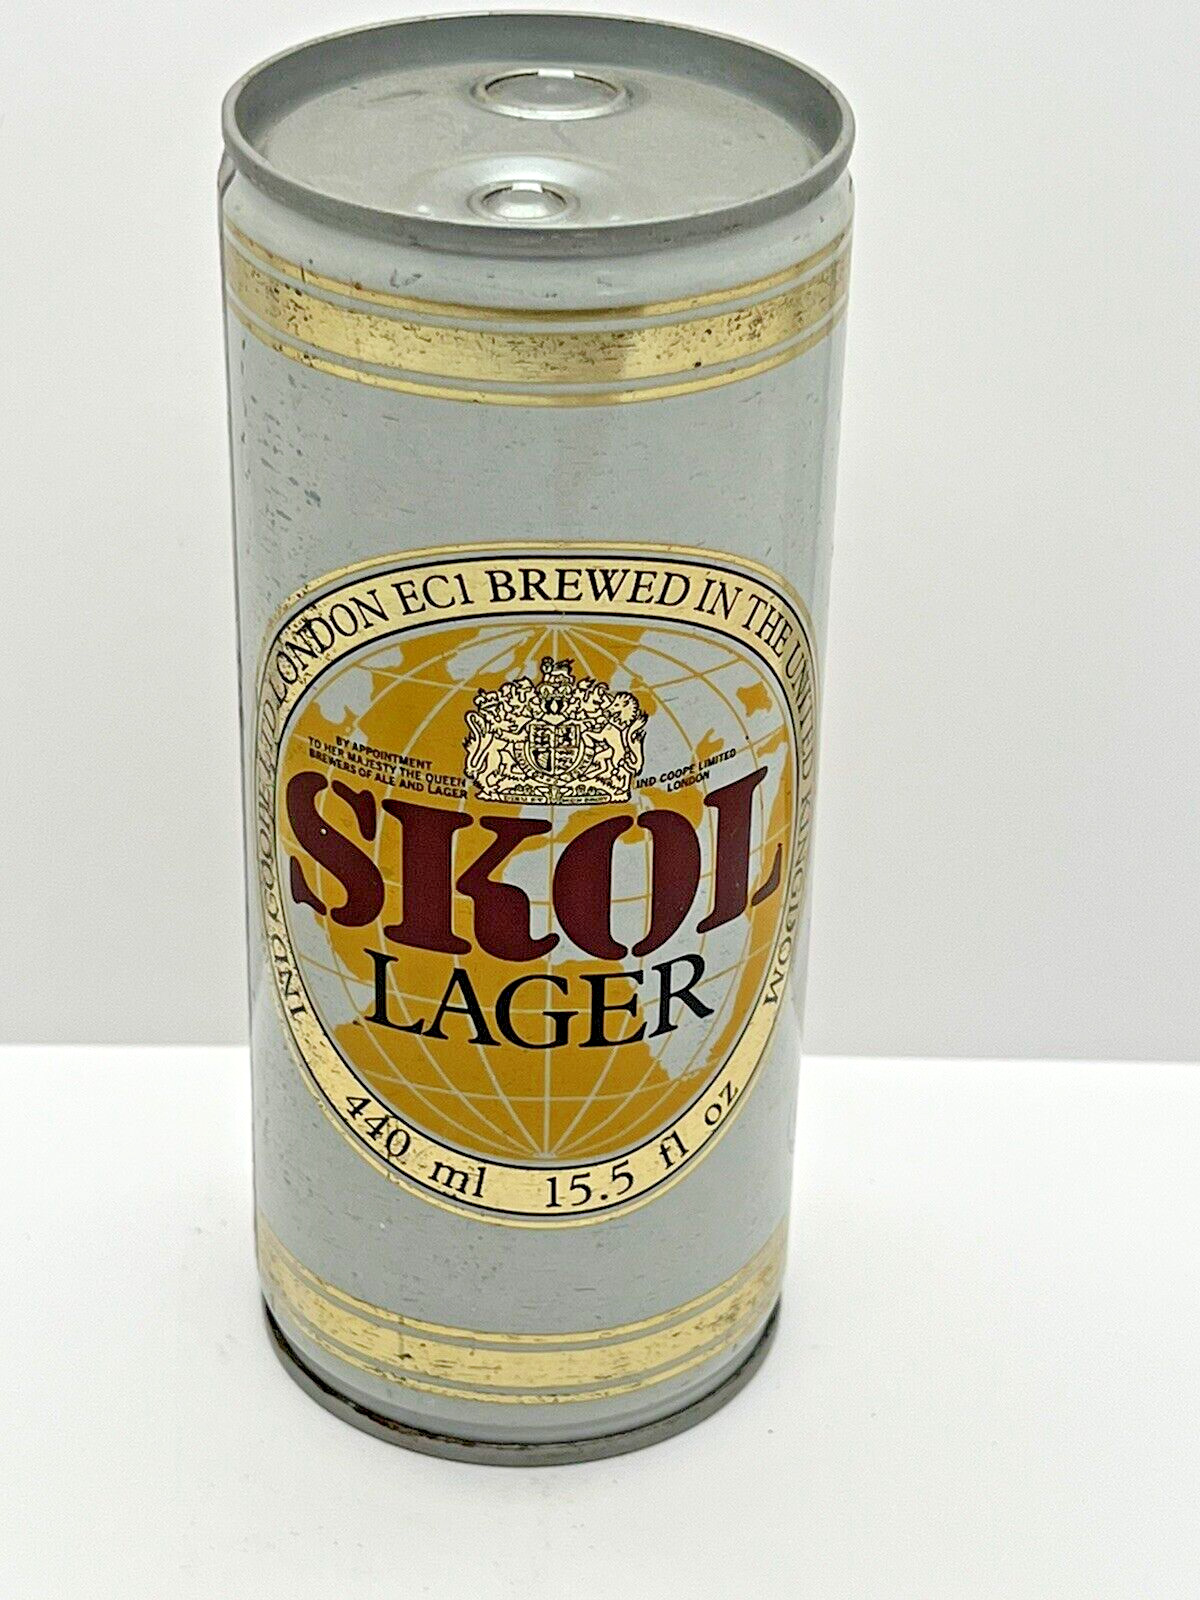 Vintage SKOL LAGER LONDON minnesota vikings Beer Can PART OF 400 CAN COLLECTION